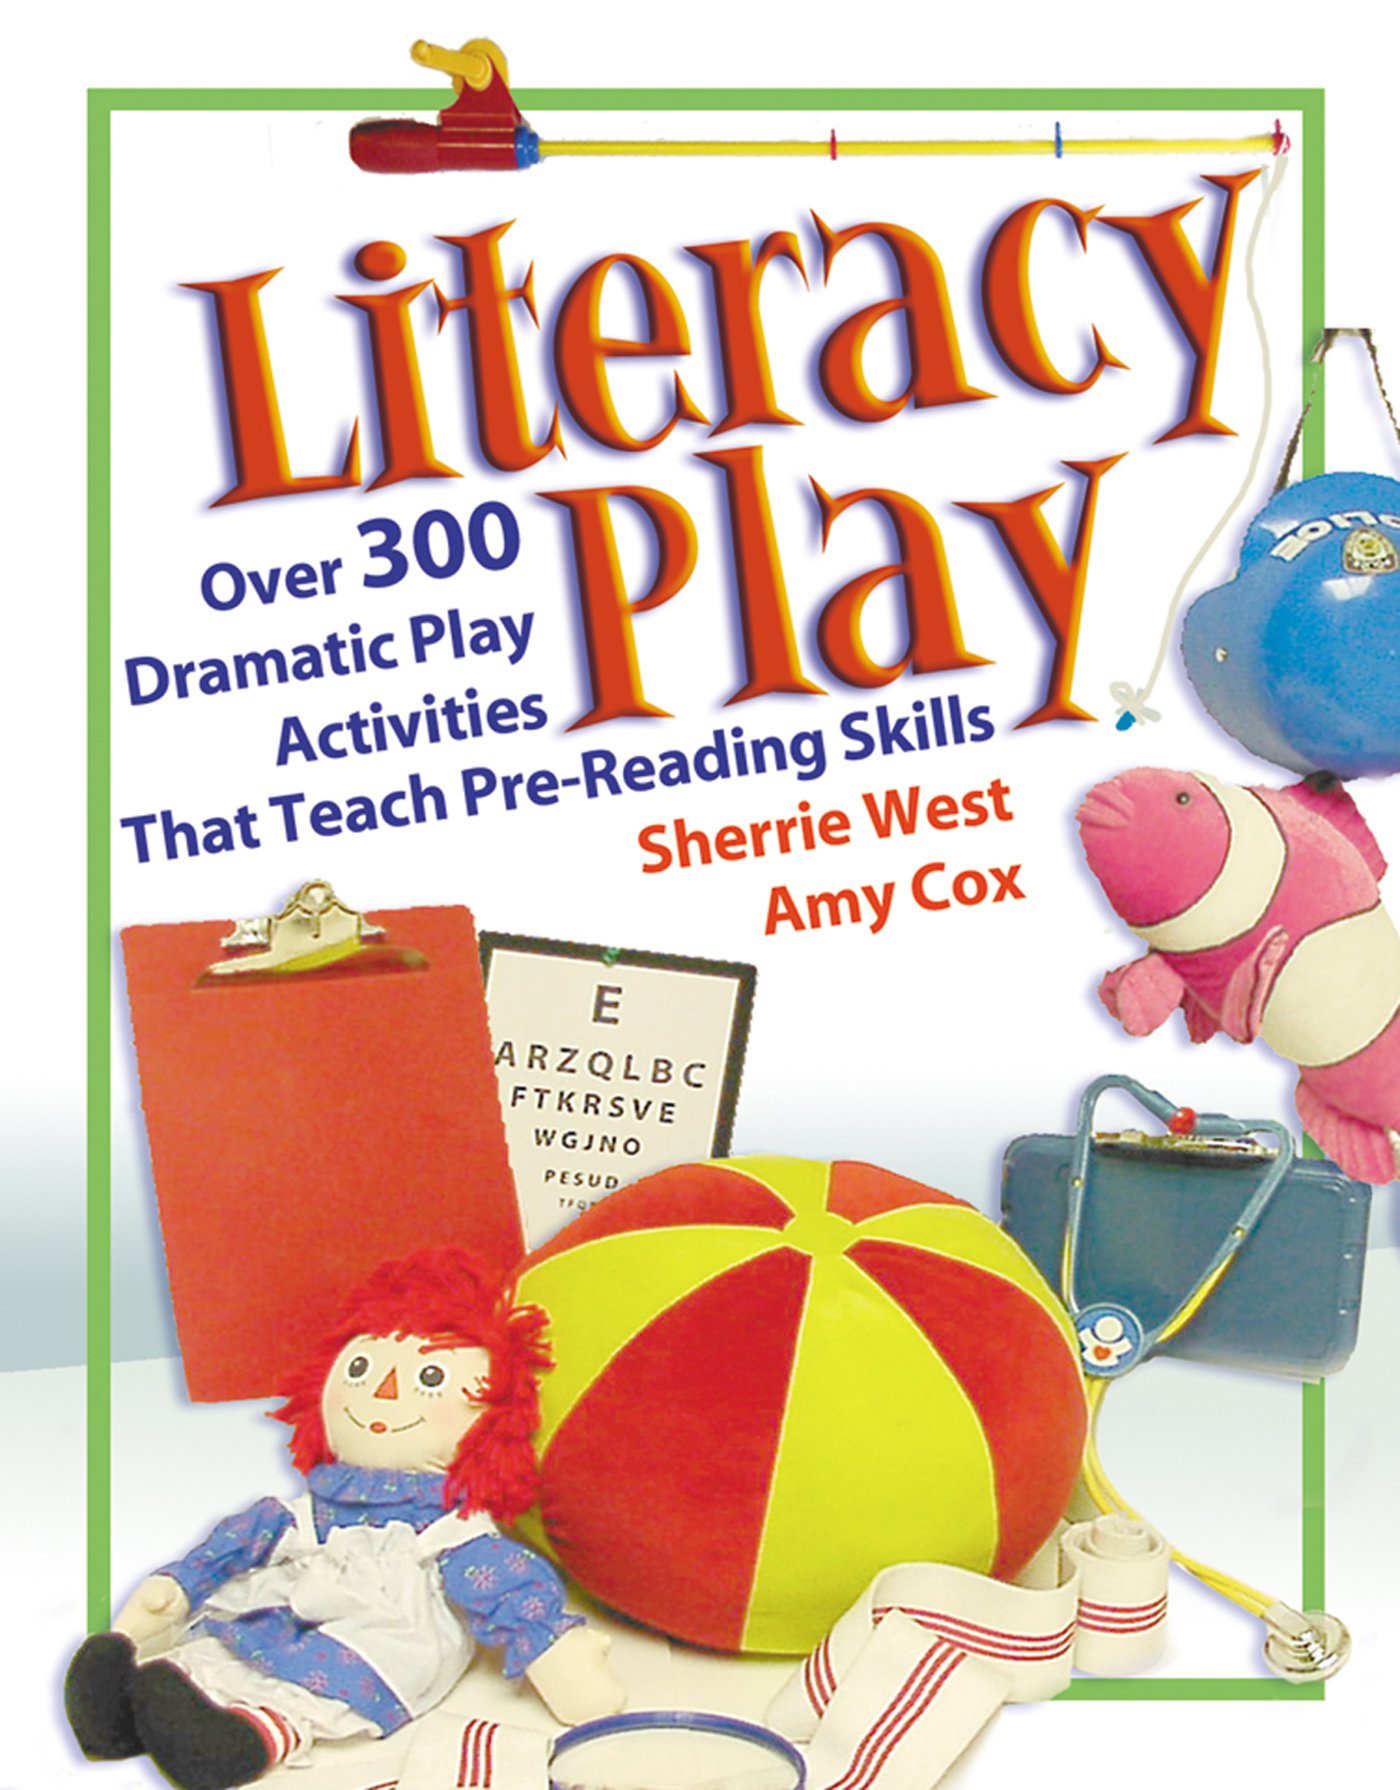 Image for Literacy Play Exam